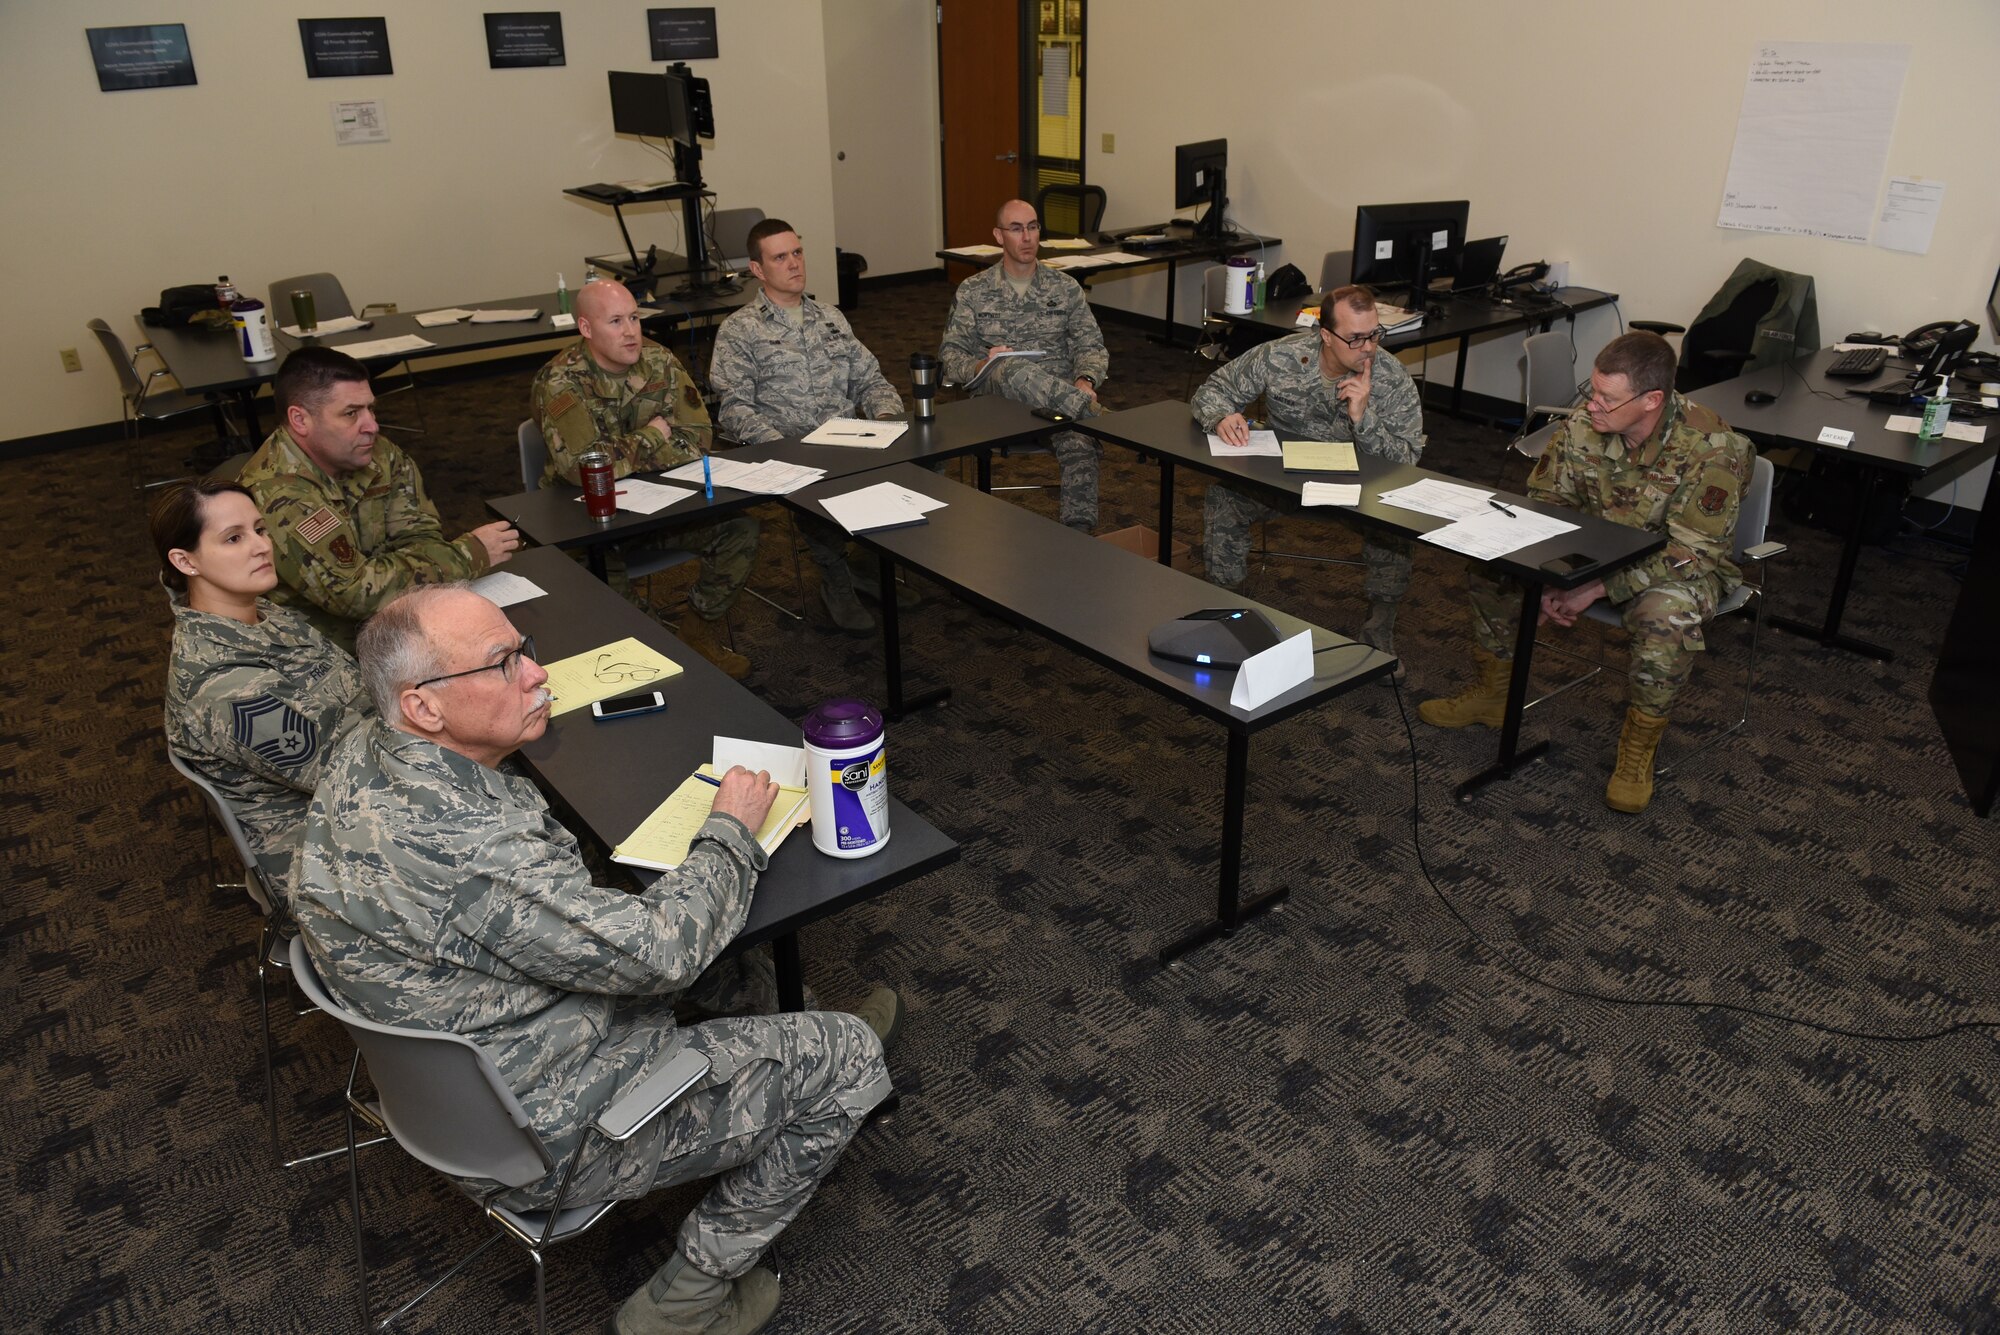 A crisis action team comprised of key members of the Wisconsin Air National Guard's 115th Fighter Wing engage in a conference call at Truax Field in Madison, Wisconsin, March 20, 2020. The 115th FW initiated a daily CAT operation on March 18 in preparation to support local authorities in the response to the COVID-19 pandemic. (U.S. Air National Guard photo by Master Sgt. Paul Gorman)